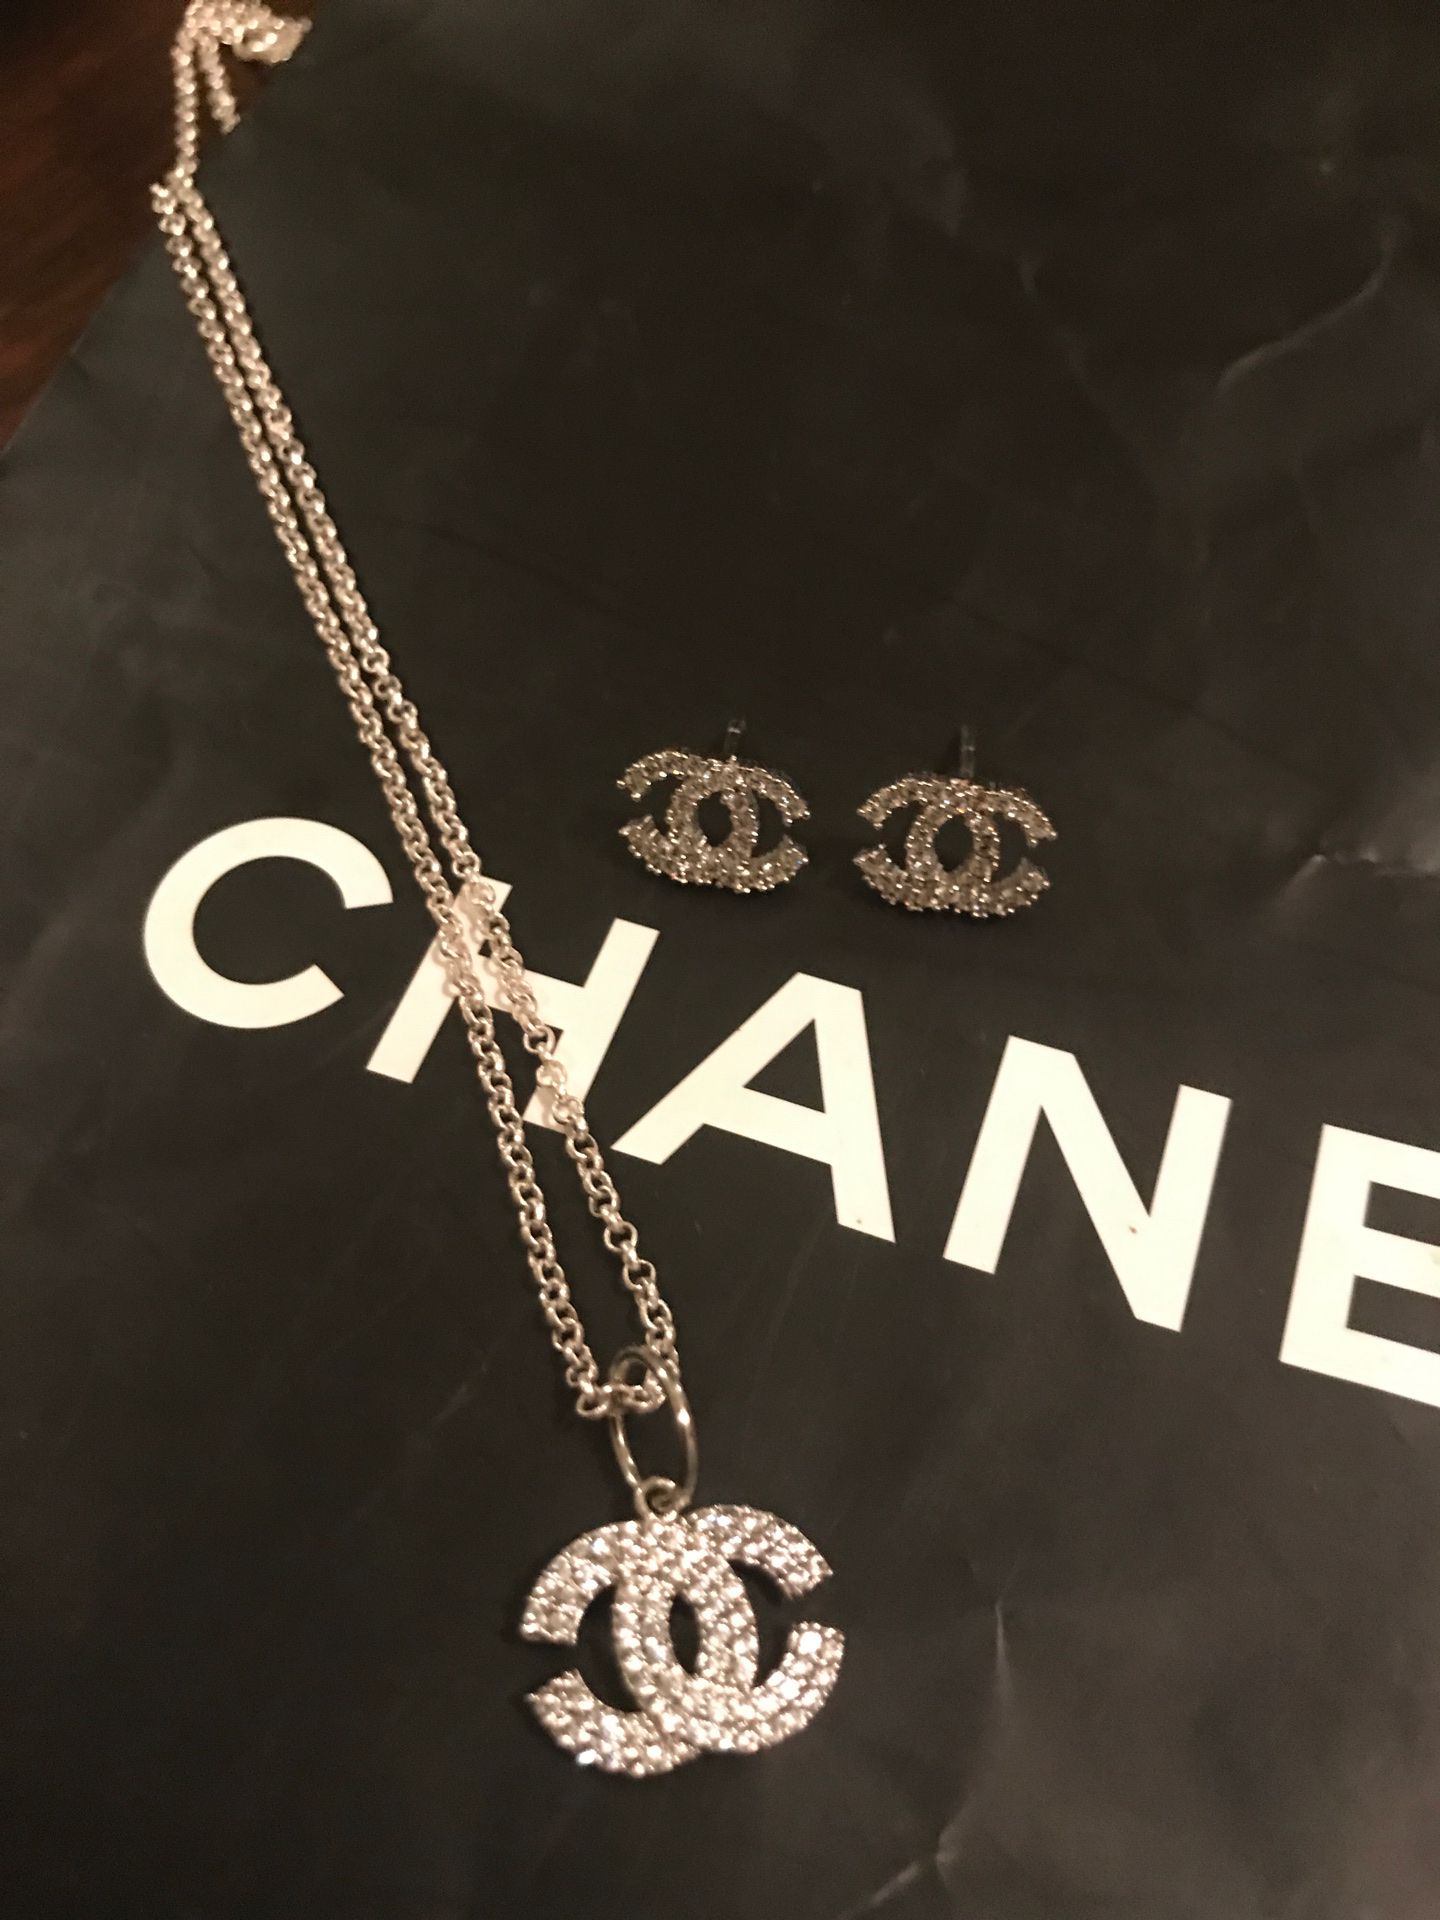 Channel diamond necklace and earrings sm gorgeous!